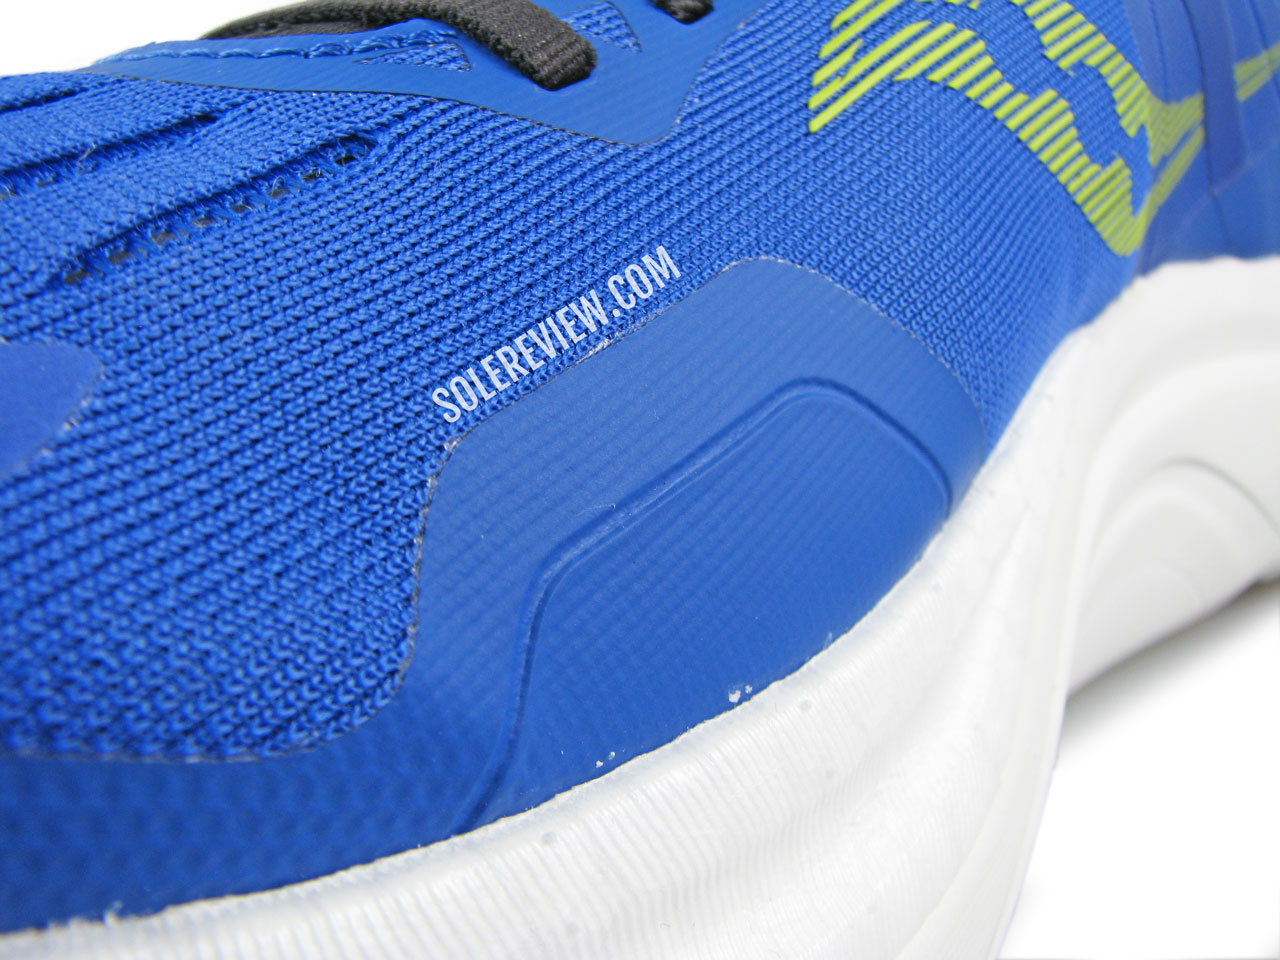 The forefoot overlay of the Saucony Tempus.